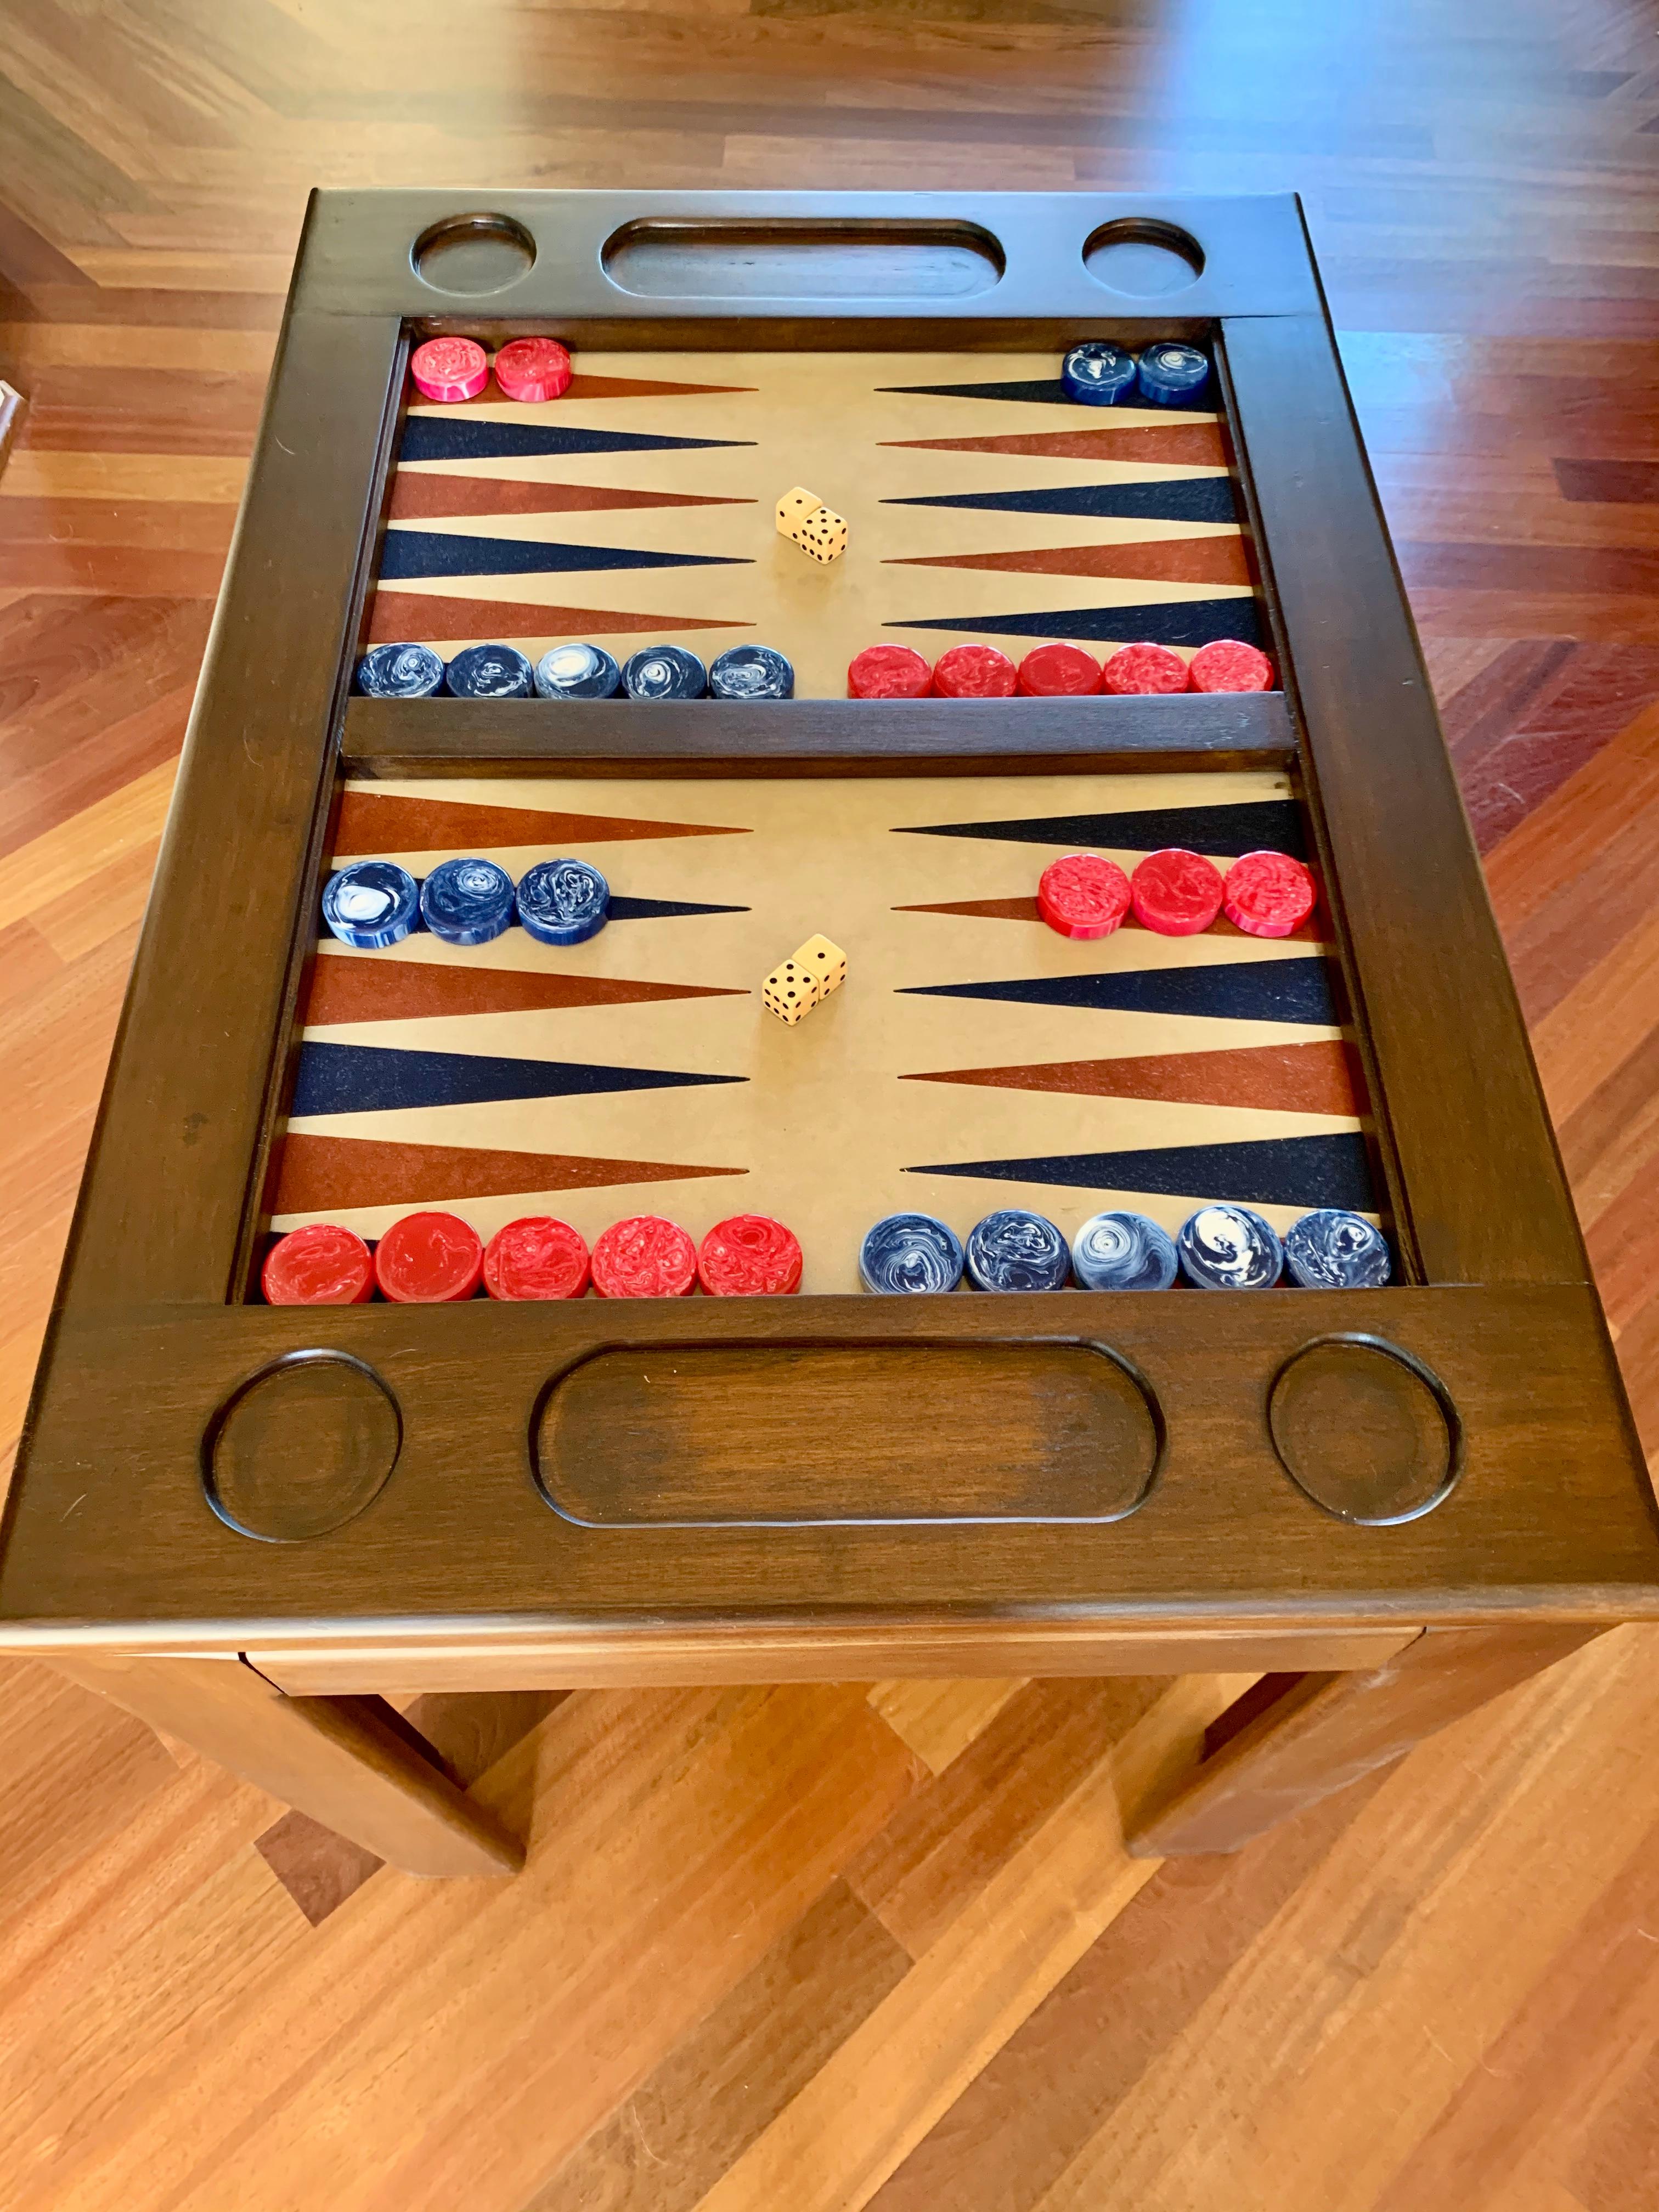 Classic oak backgammon table refinished in medium walnut. Suede game board with red and blue triangles. Custom glass top, bone dice and game pieces included with purchase. Great colors and the perfect scale for a game table.